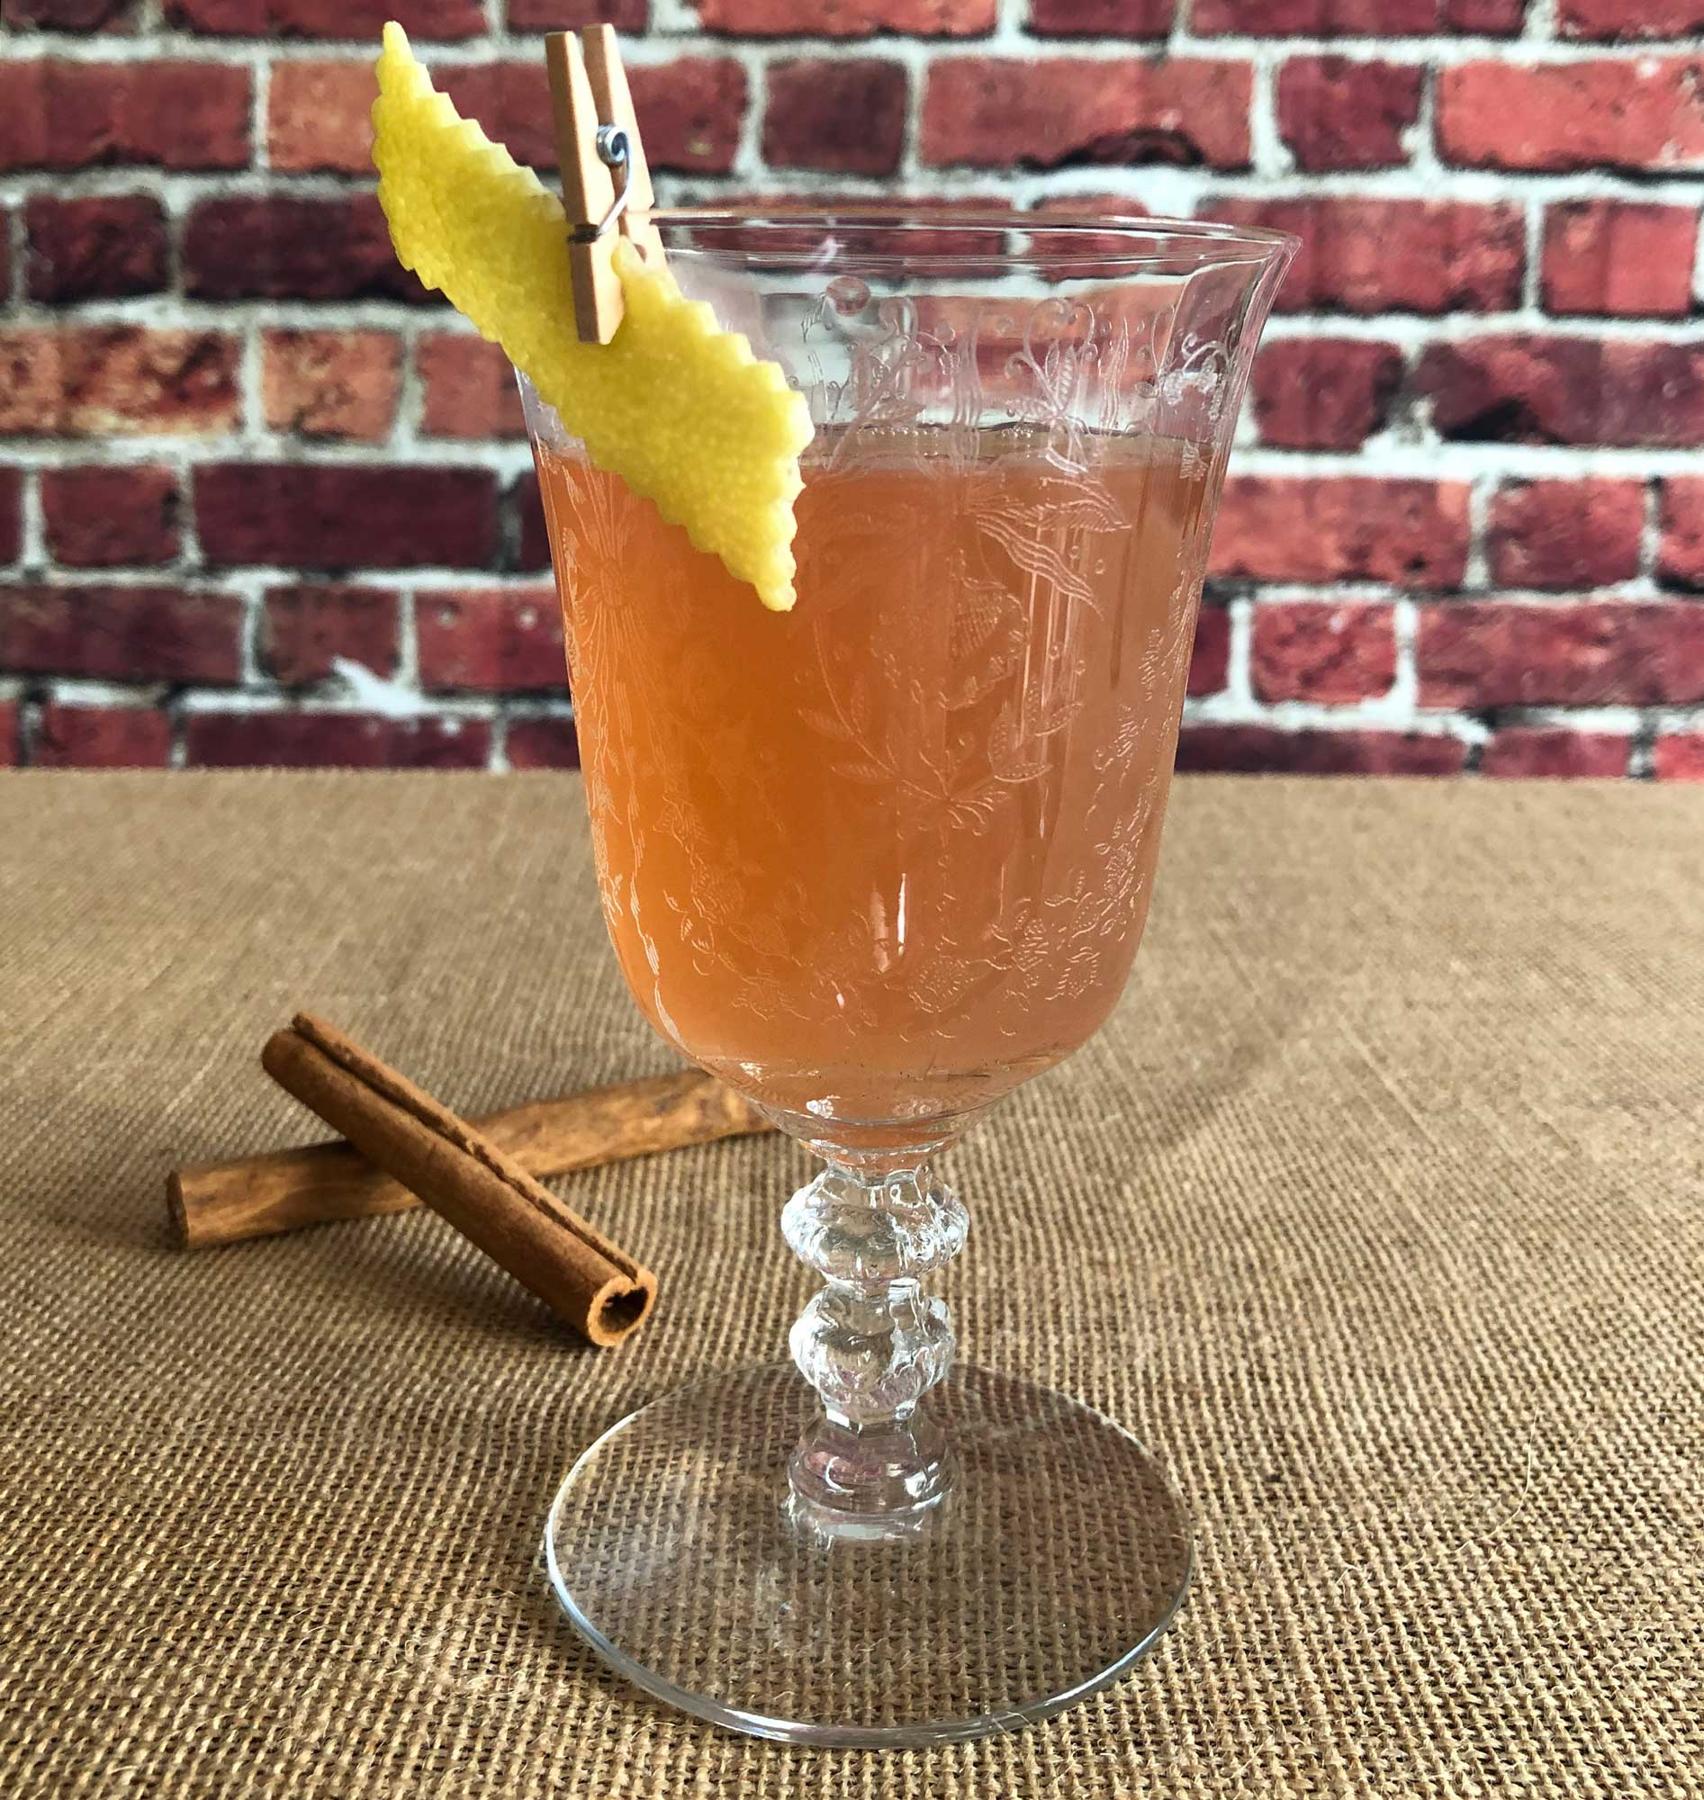 An example of the Real Thing Toddy, the mixed drink (drink) featuring hot water, The Scarlet Ibis Trinidad Rum, Zirbenz Stone Pine Liqueur of the Alps, lemon juice, sugar, cinnamon stick, and lemon twist; photo by Lee Edwards